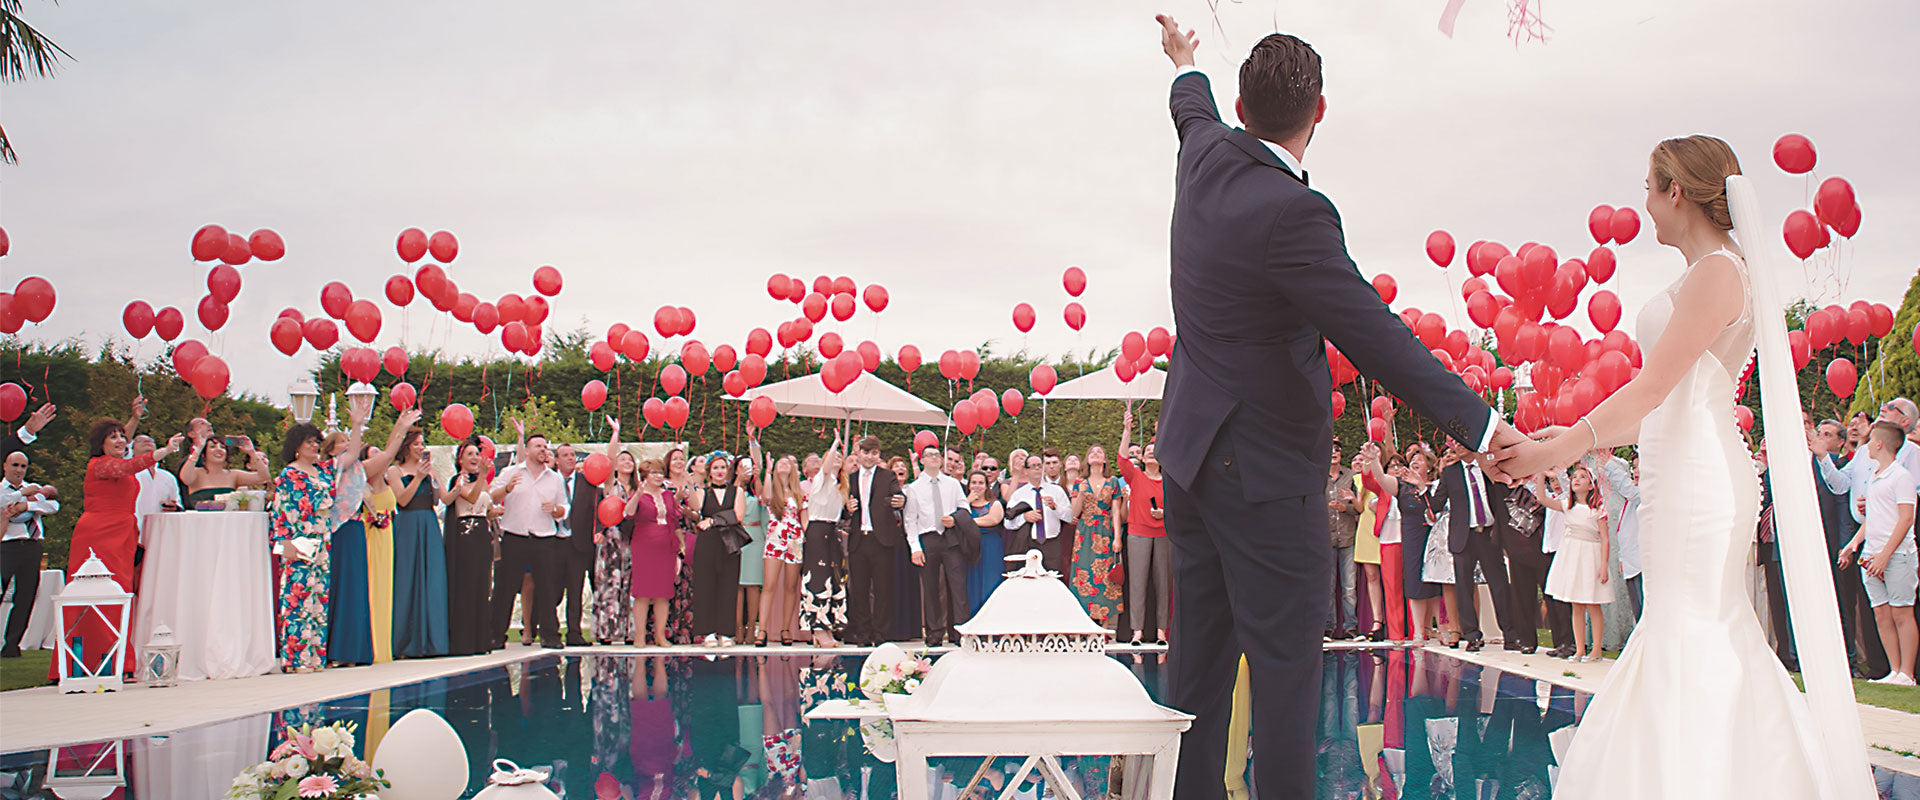 Want To Politely Decline An Invite For A Wedding? Do It The Right Way.